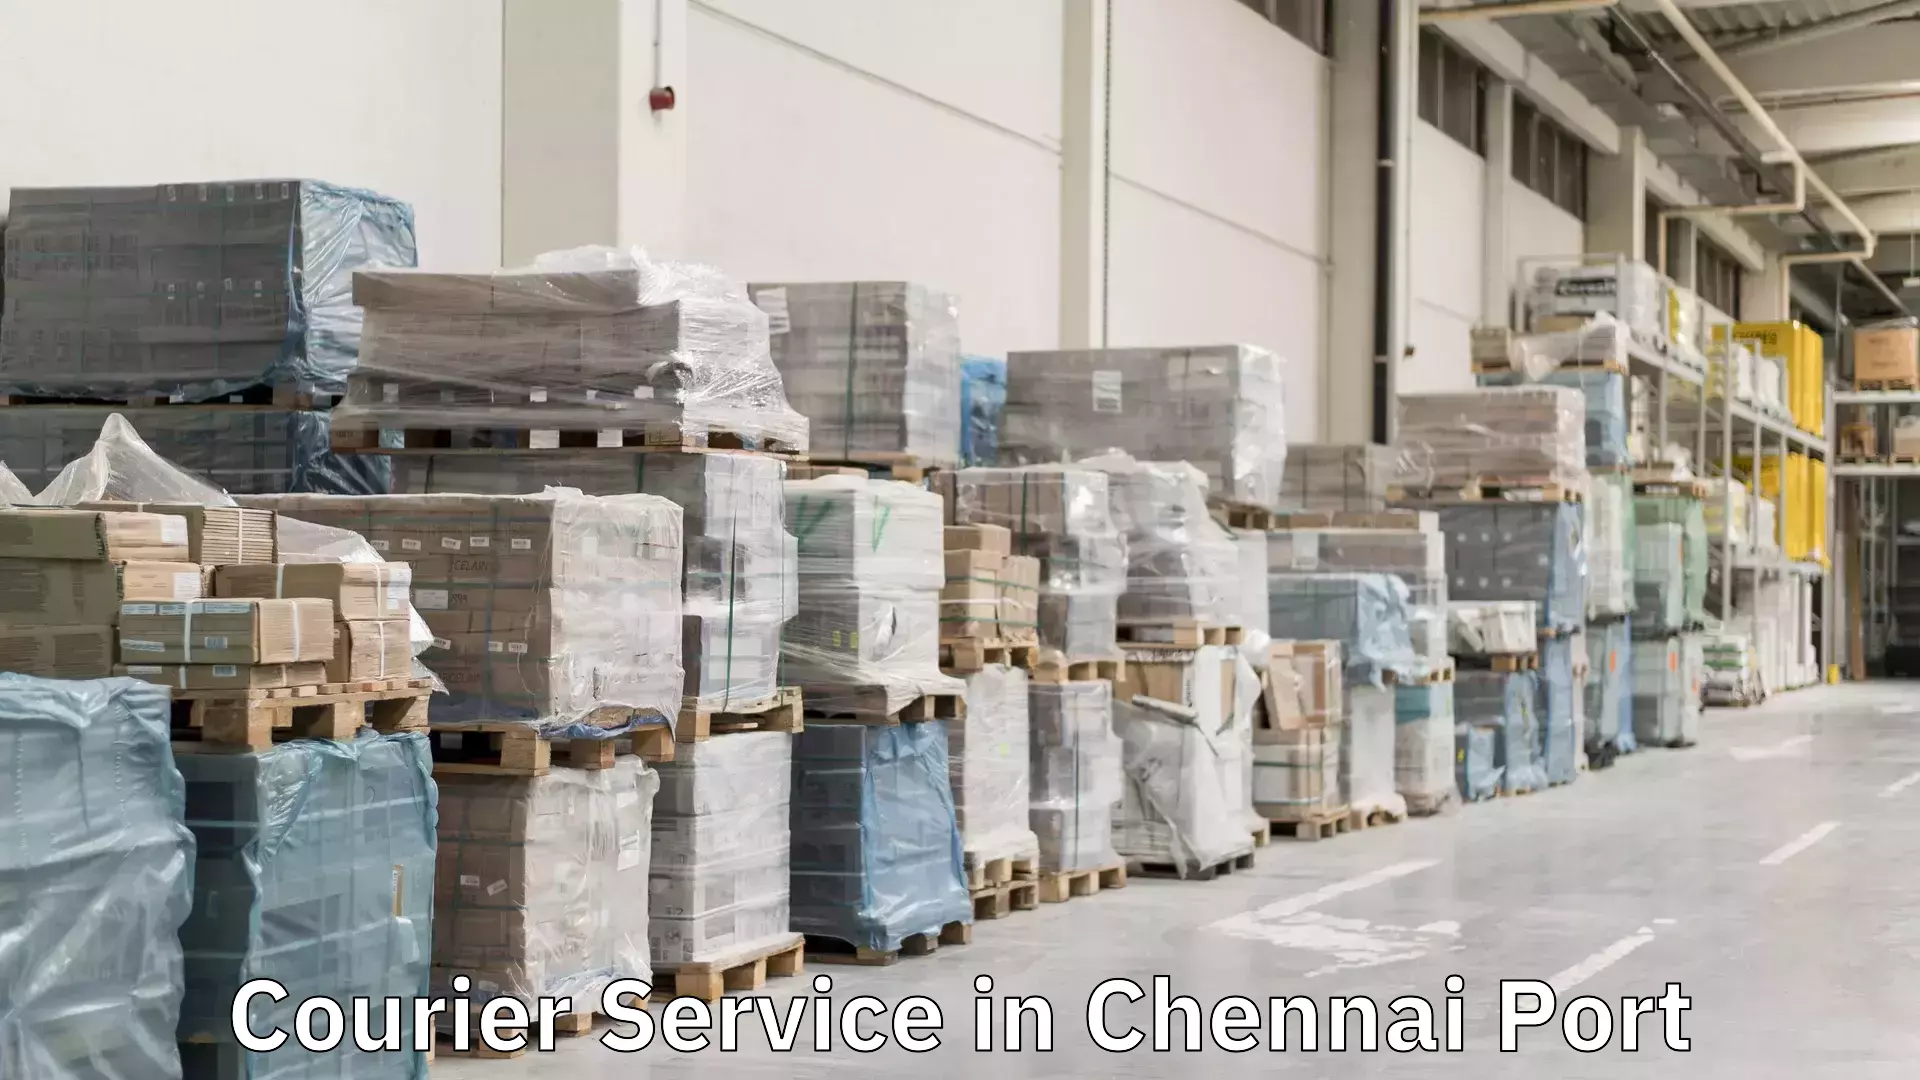 Expedited shipping solutions in Chennai Port